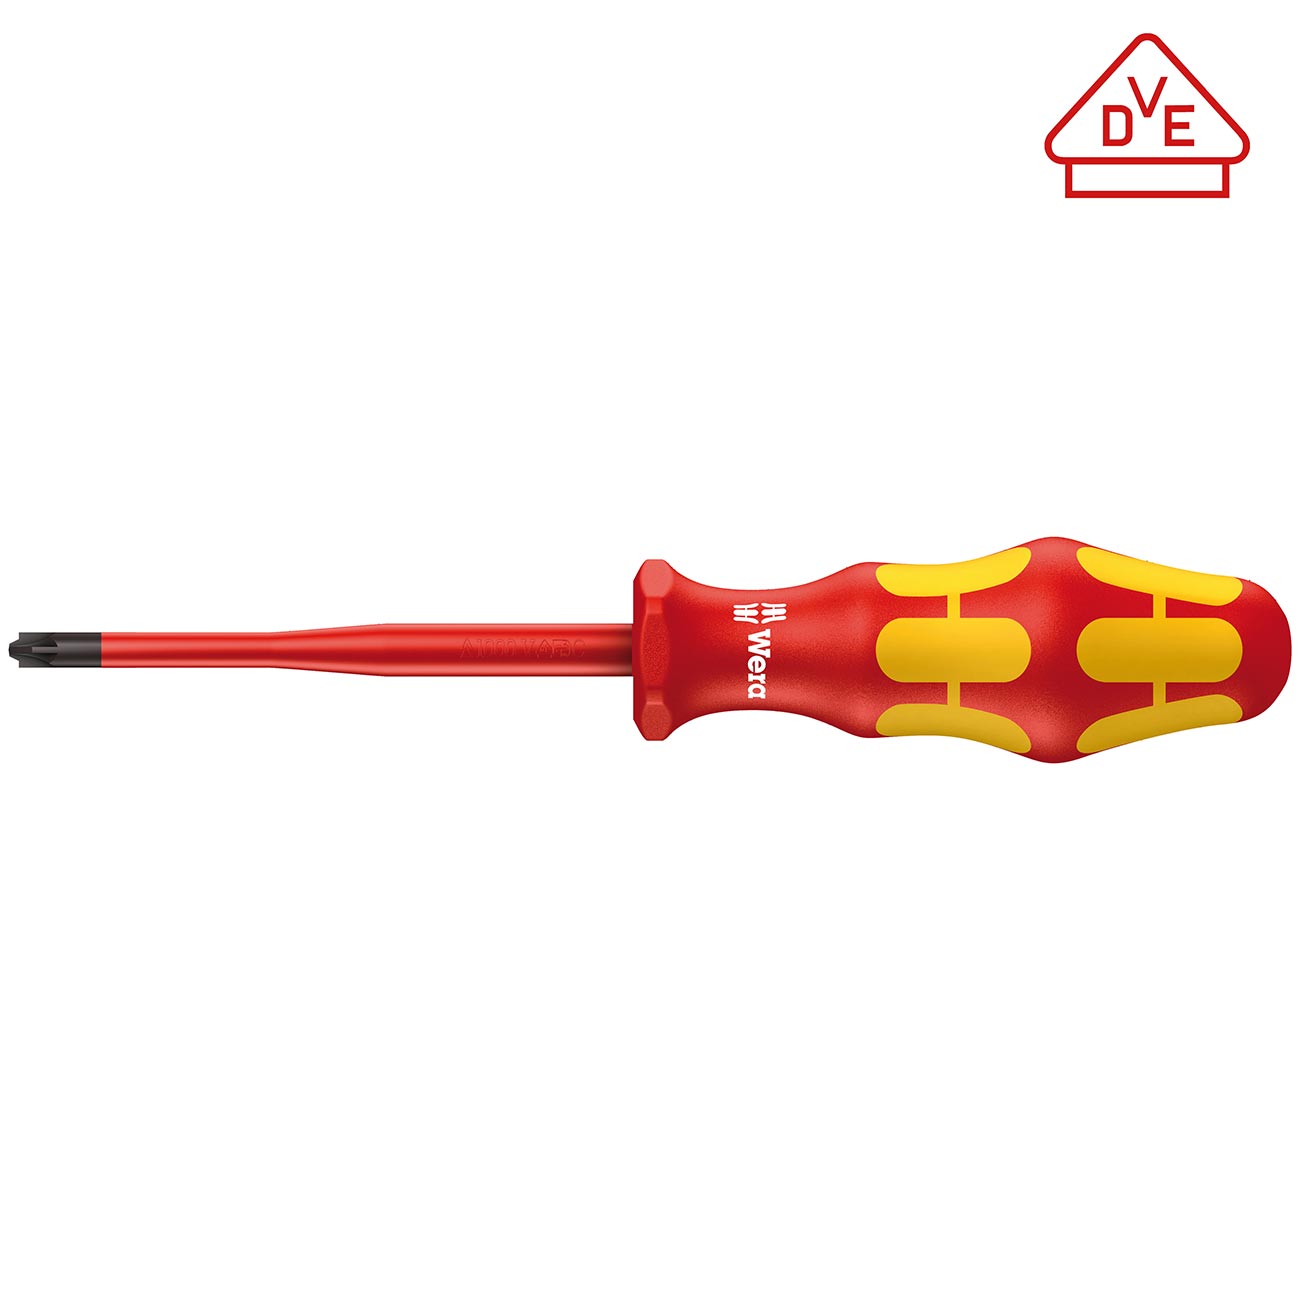 Wera VDE Insulated Screwdriver: PlusMinus PS# 2 x 100mm (Pozidriv/slotted)